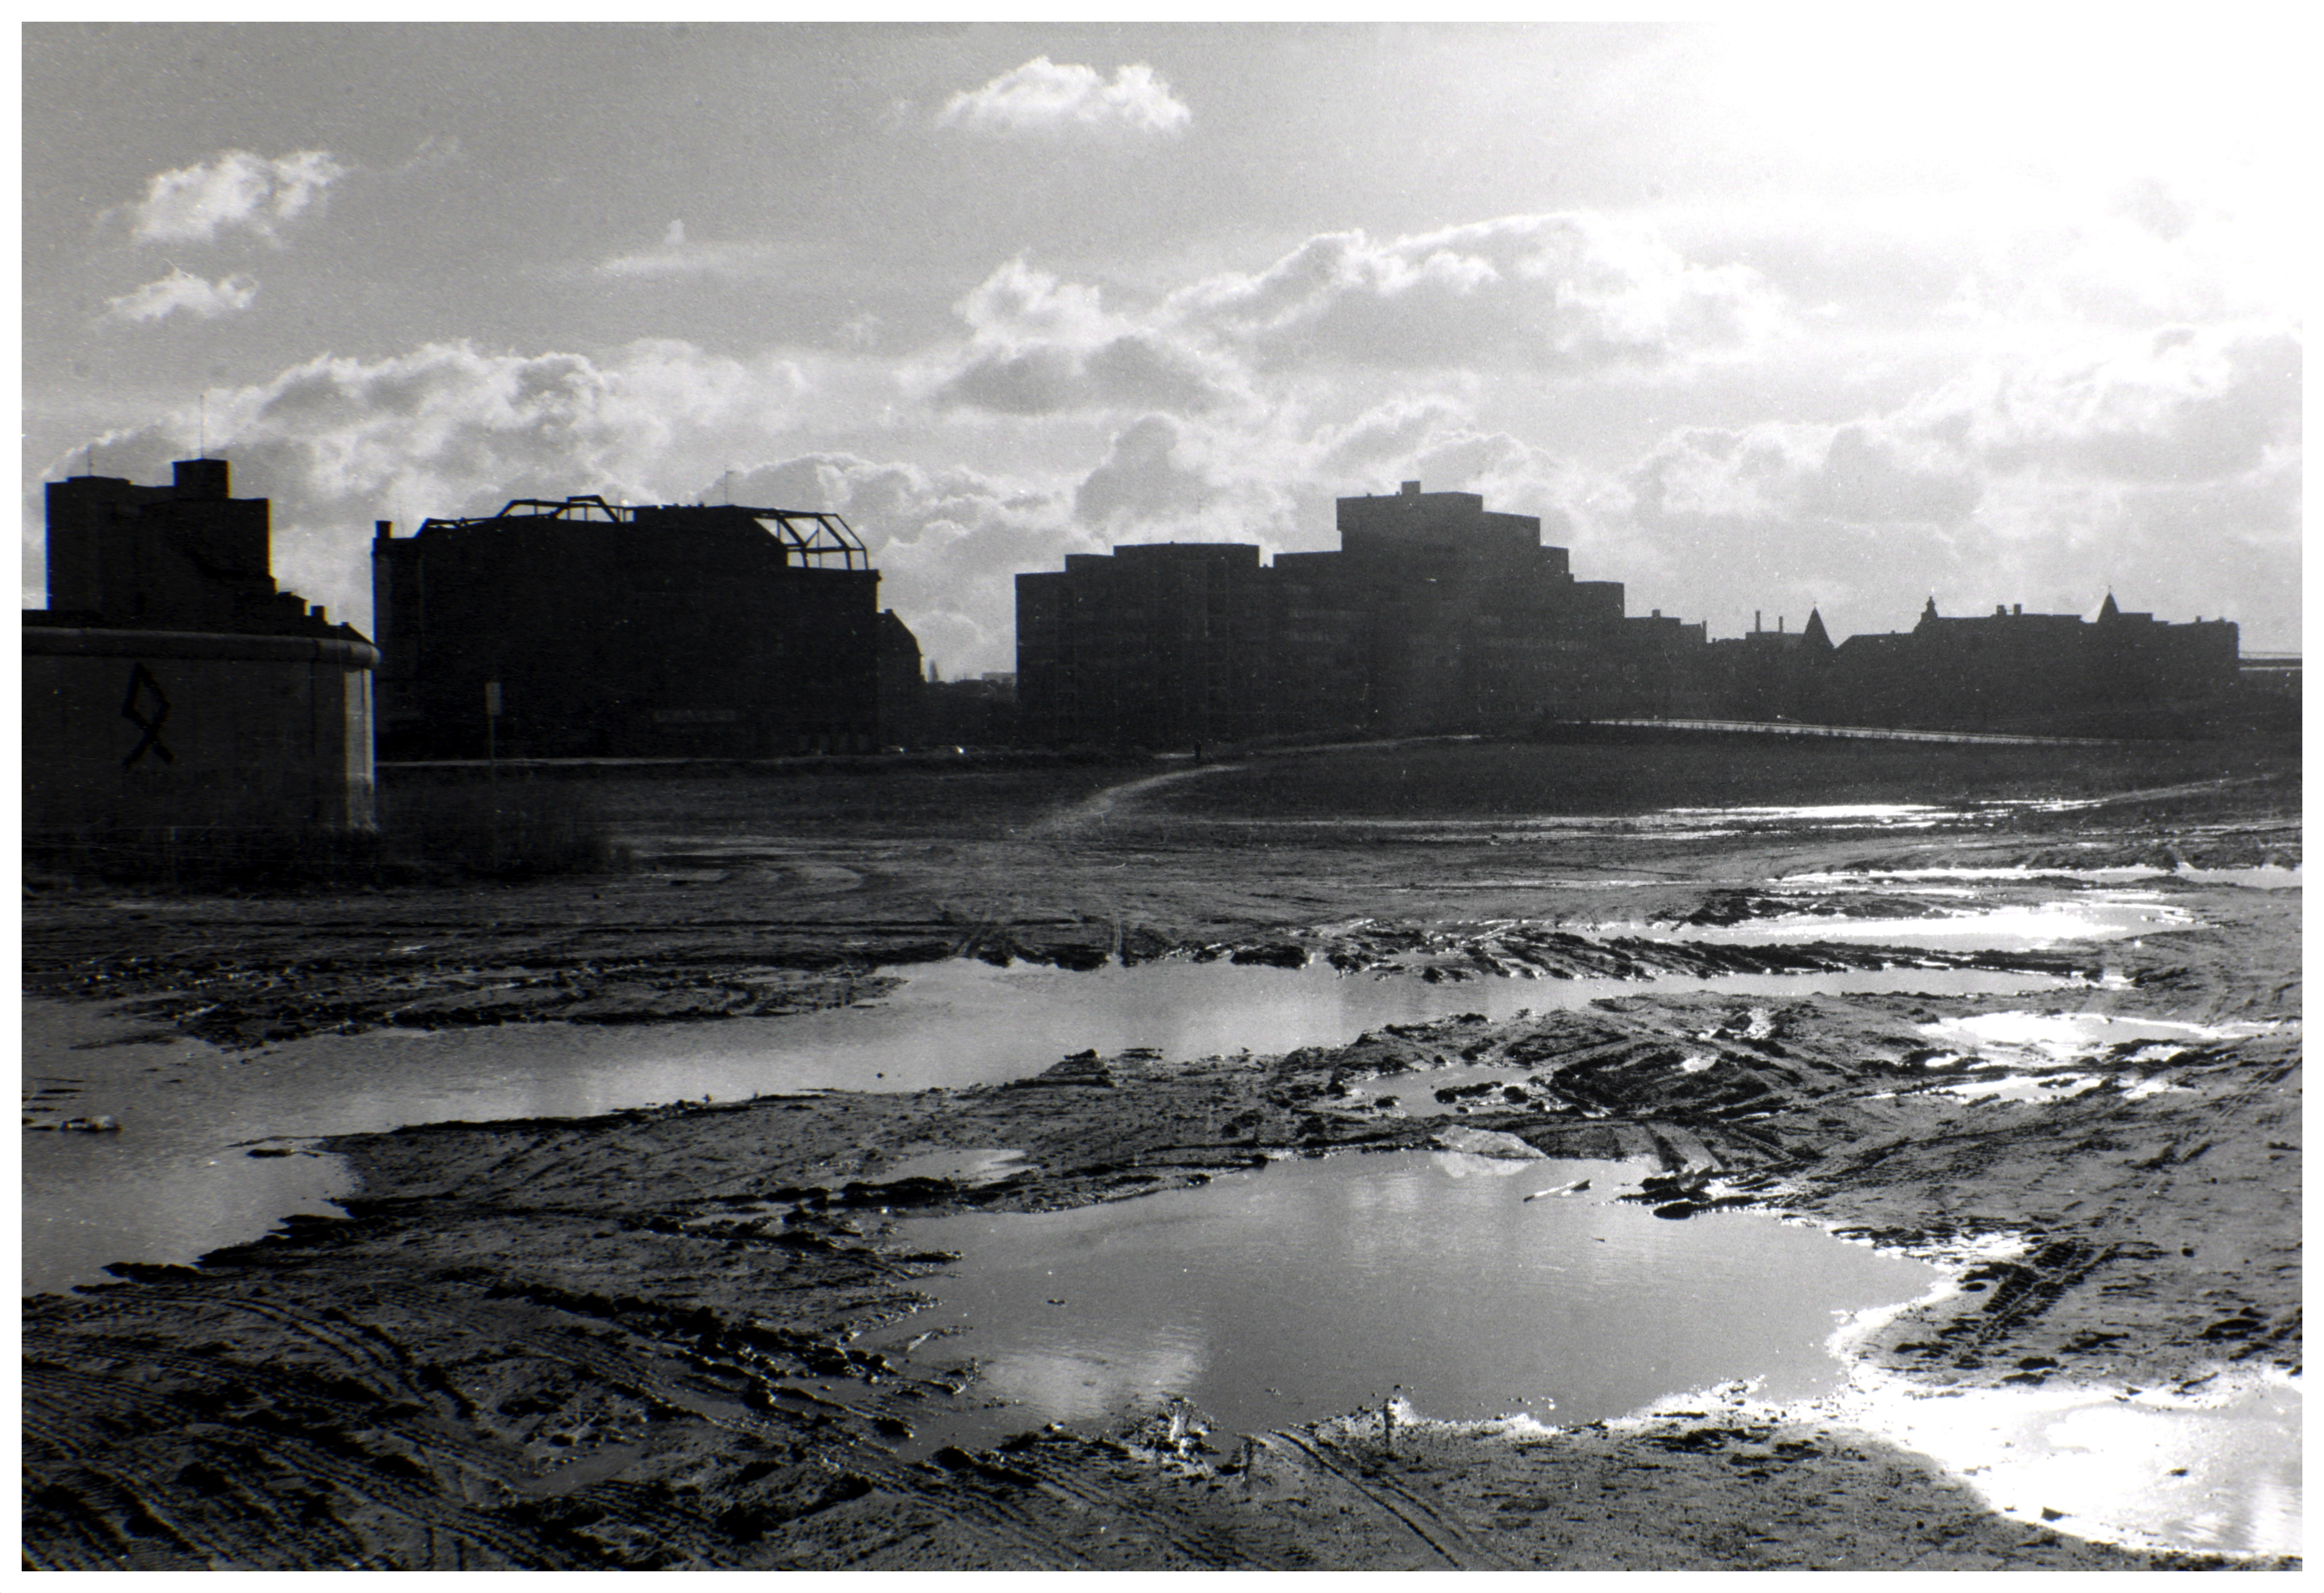 A black and white photo of an open, muddy area and buildings lining the horizon.